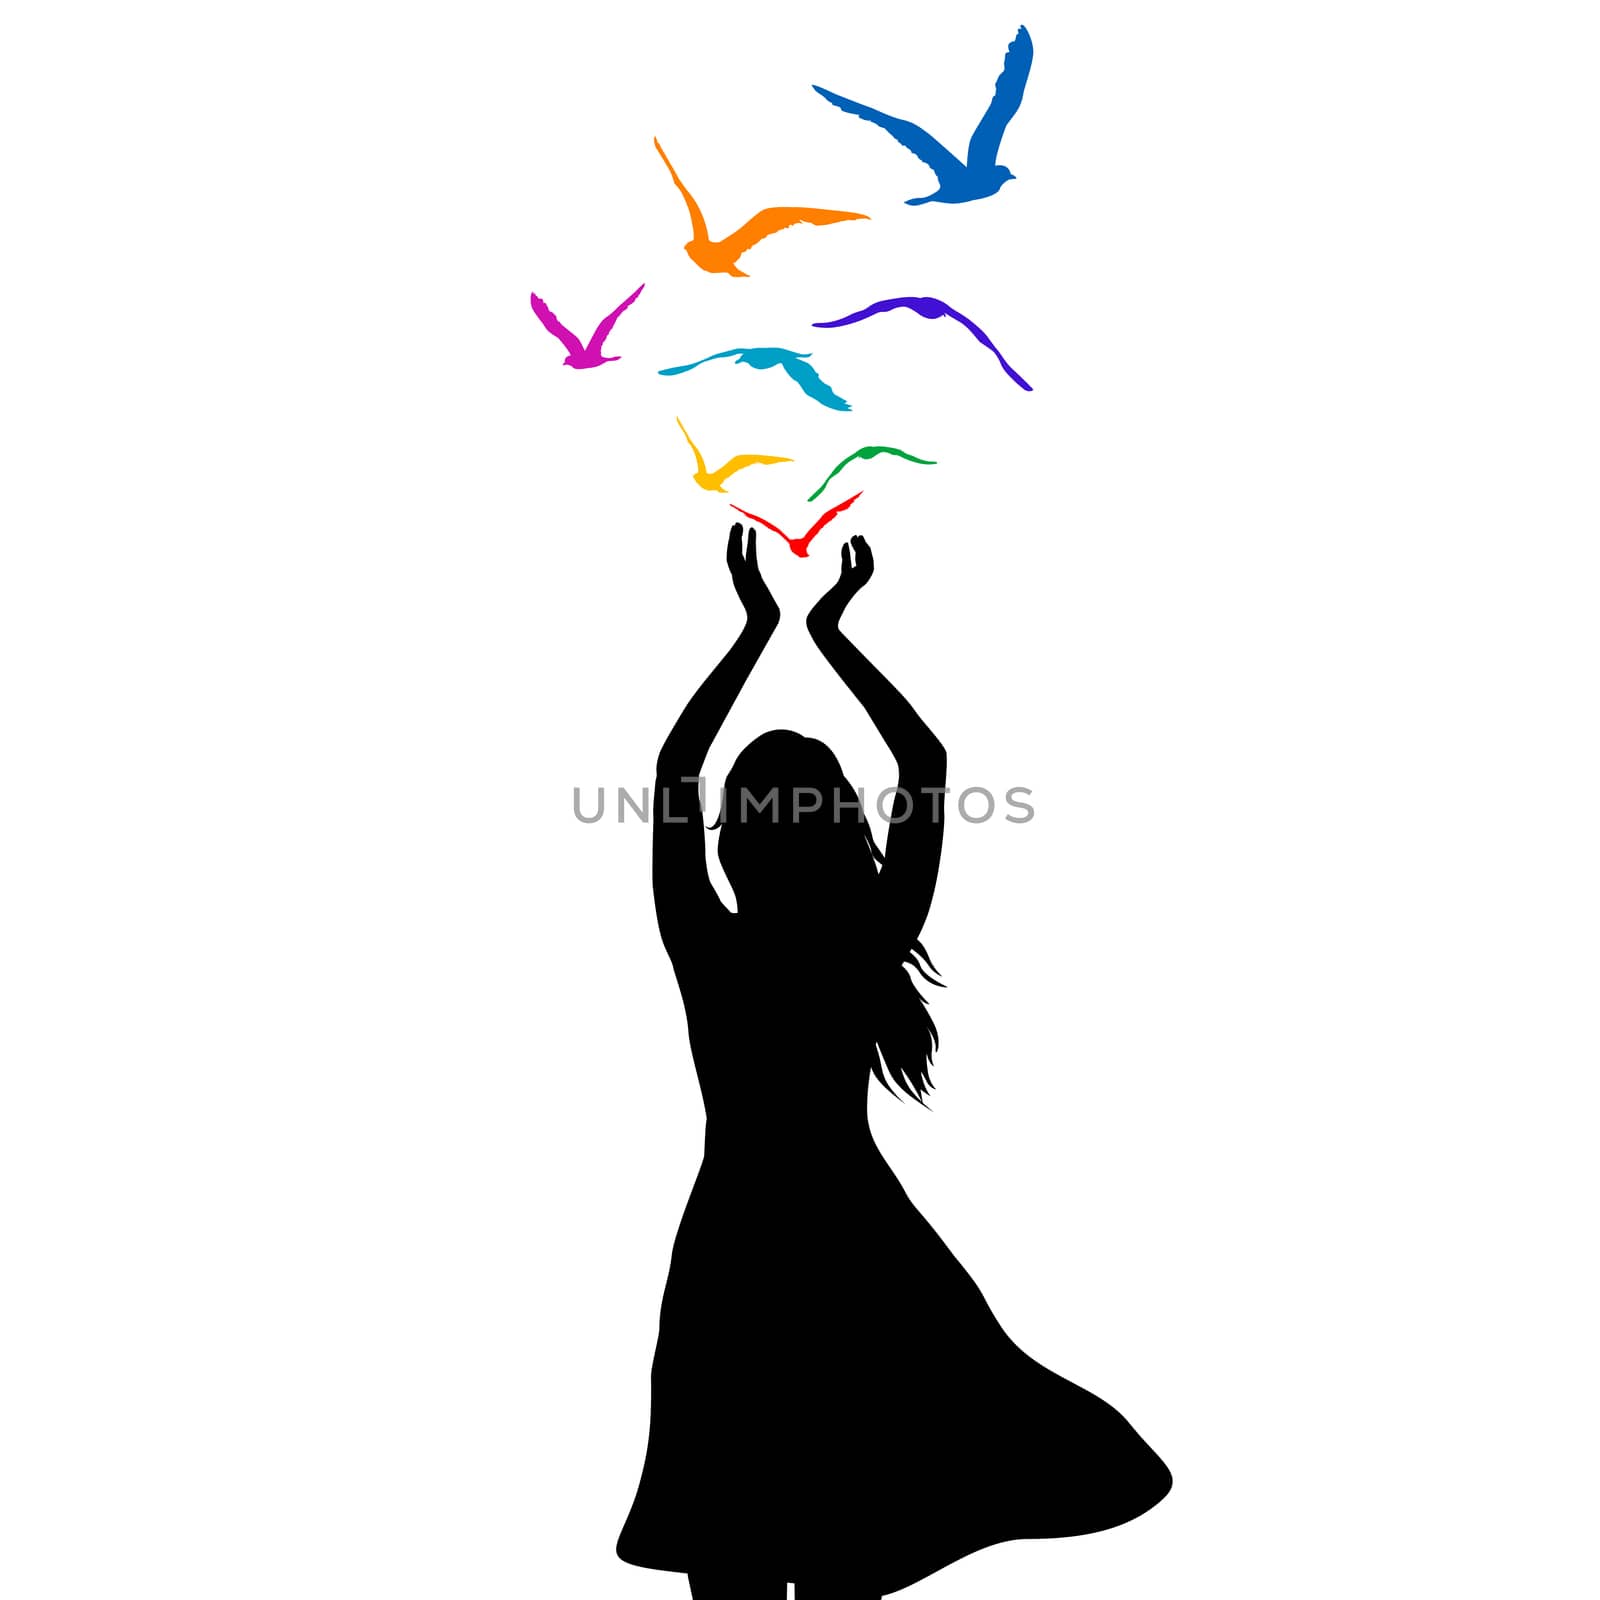 Abstract illustration of a woman silhouette with colored birds flying from her hands